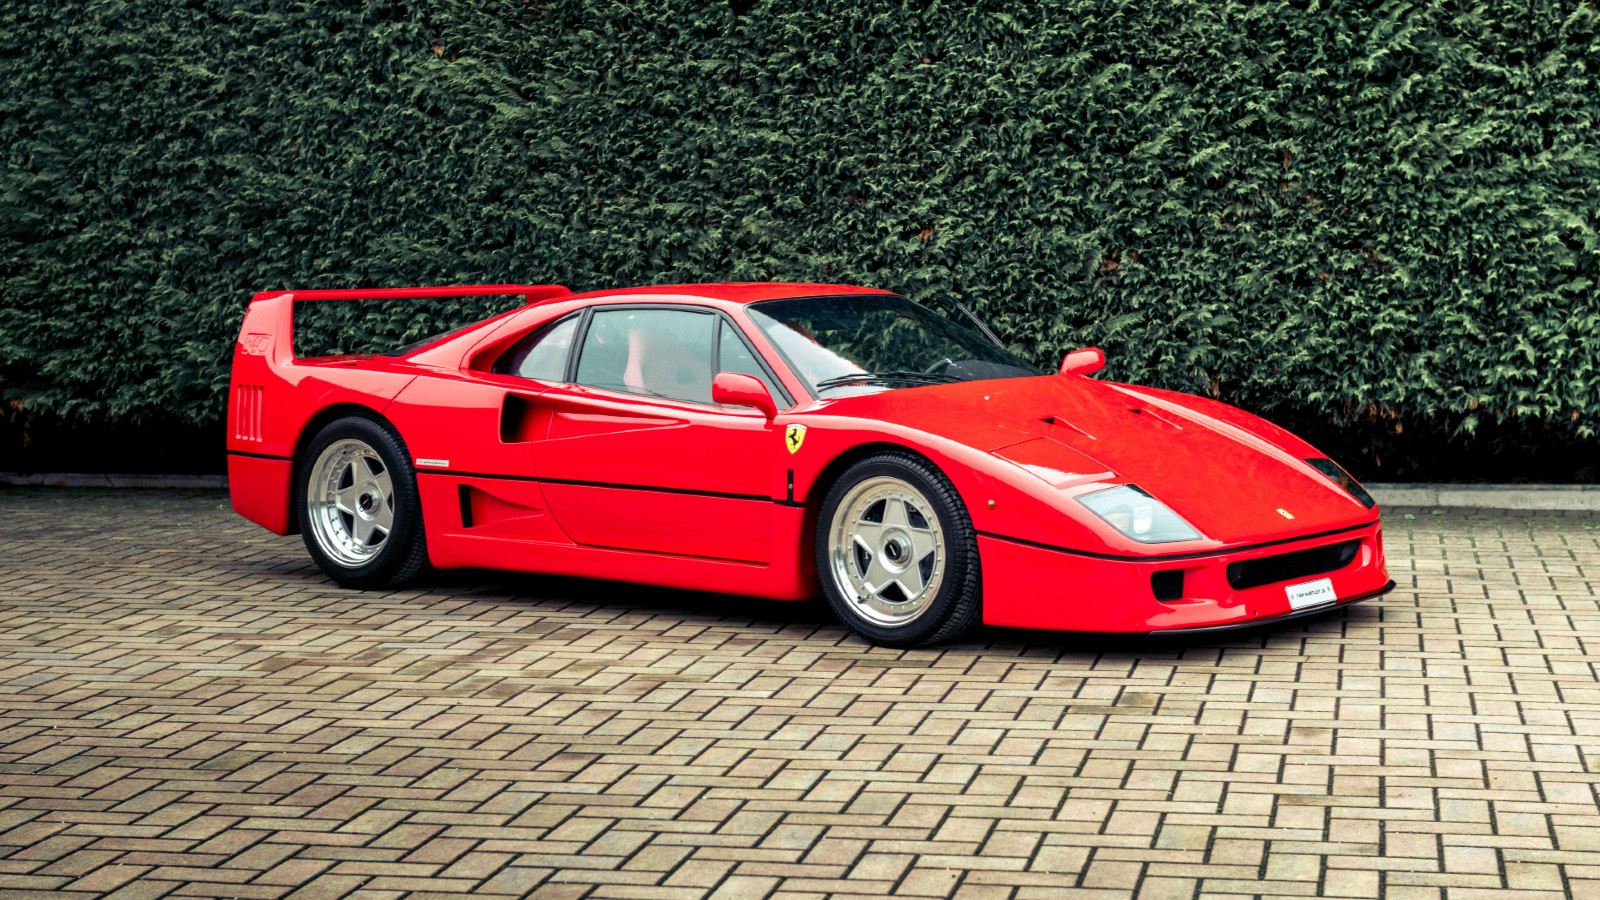 Toto Wolff's Ferrari F40 is up for sale.